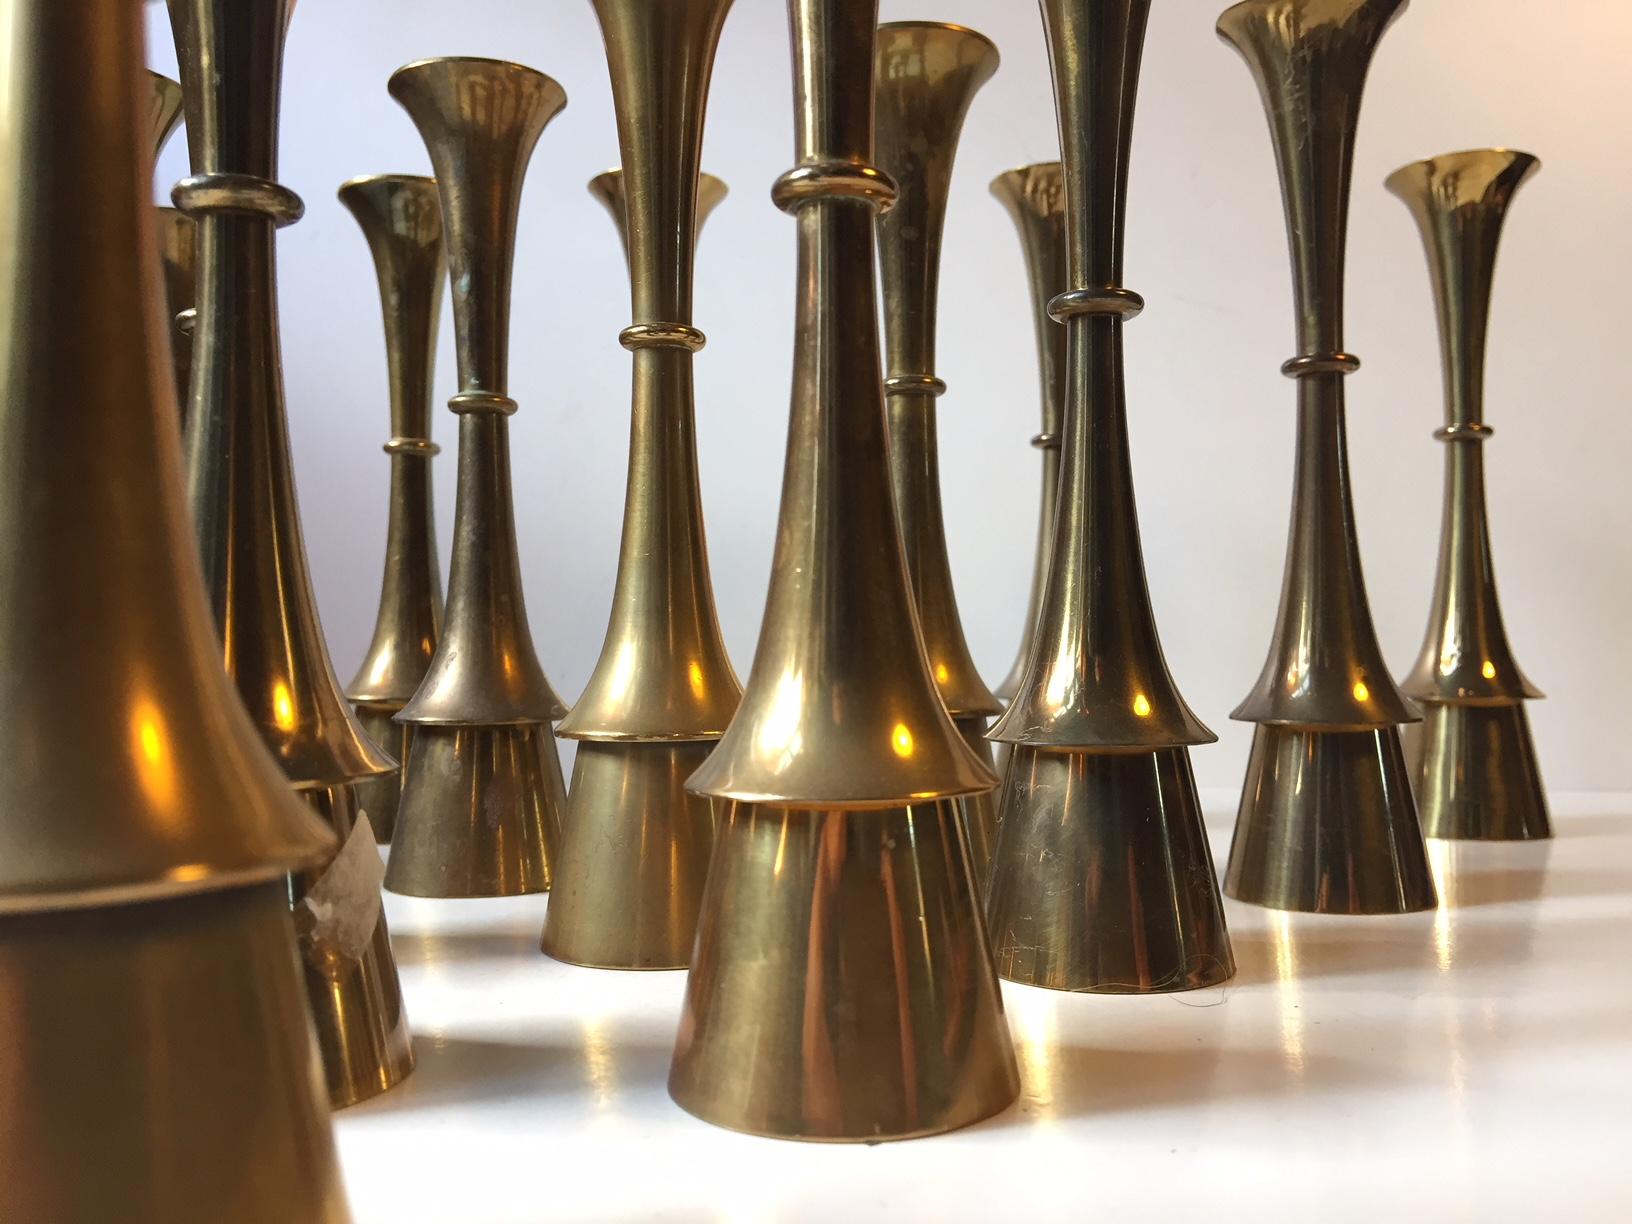 Group of 15 solid brass candlesticks designed and manufactured by Hyslop in Copenhagen, Denmark during the 1960s. The candlesticks are to be fitted with regular sixed candles. They have not been polished recently and all of them display a patina. If